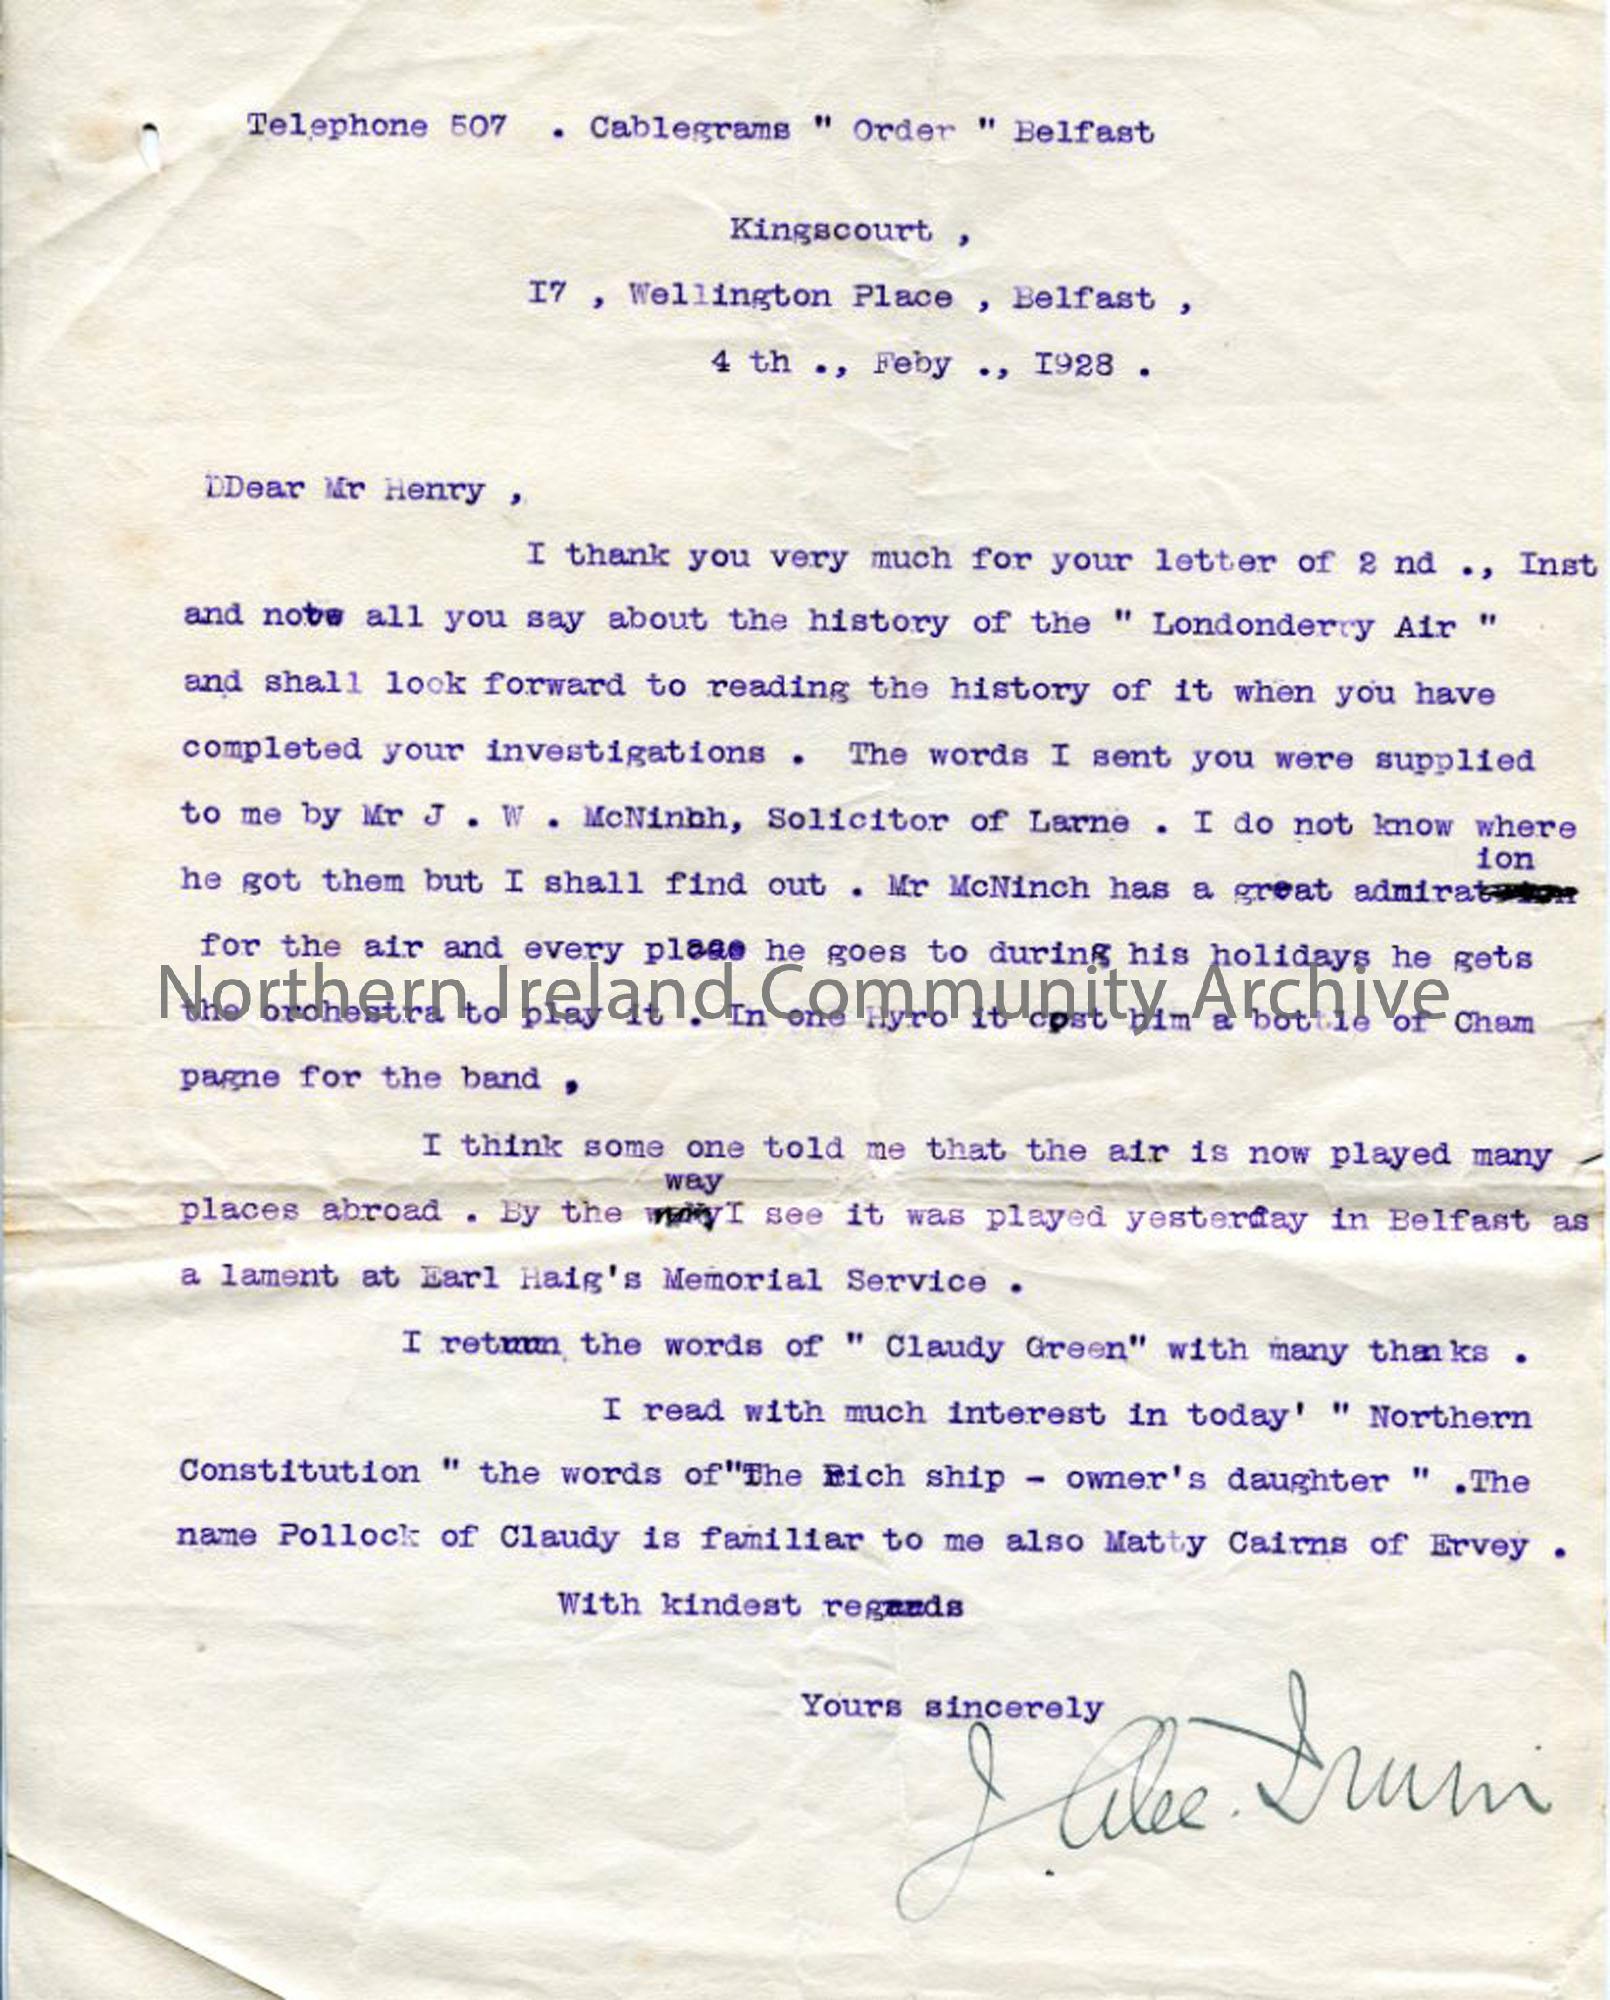 Letter from Alec J Irwin, 4.2.1928